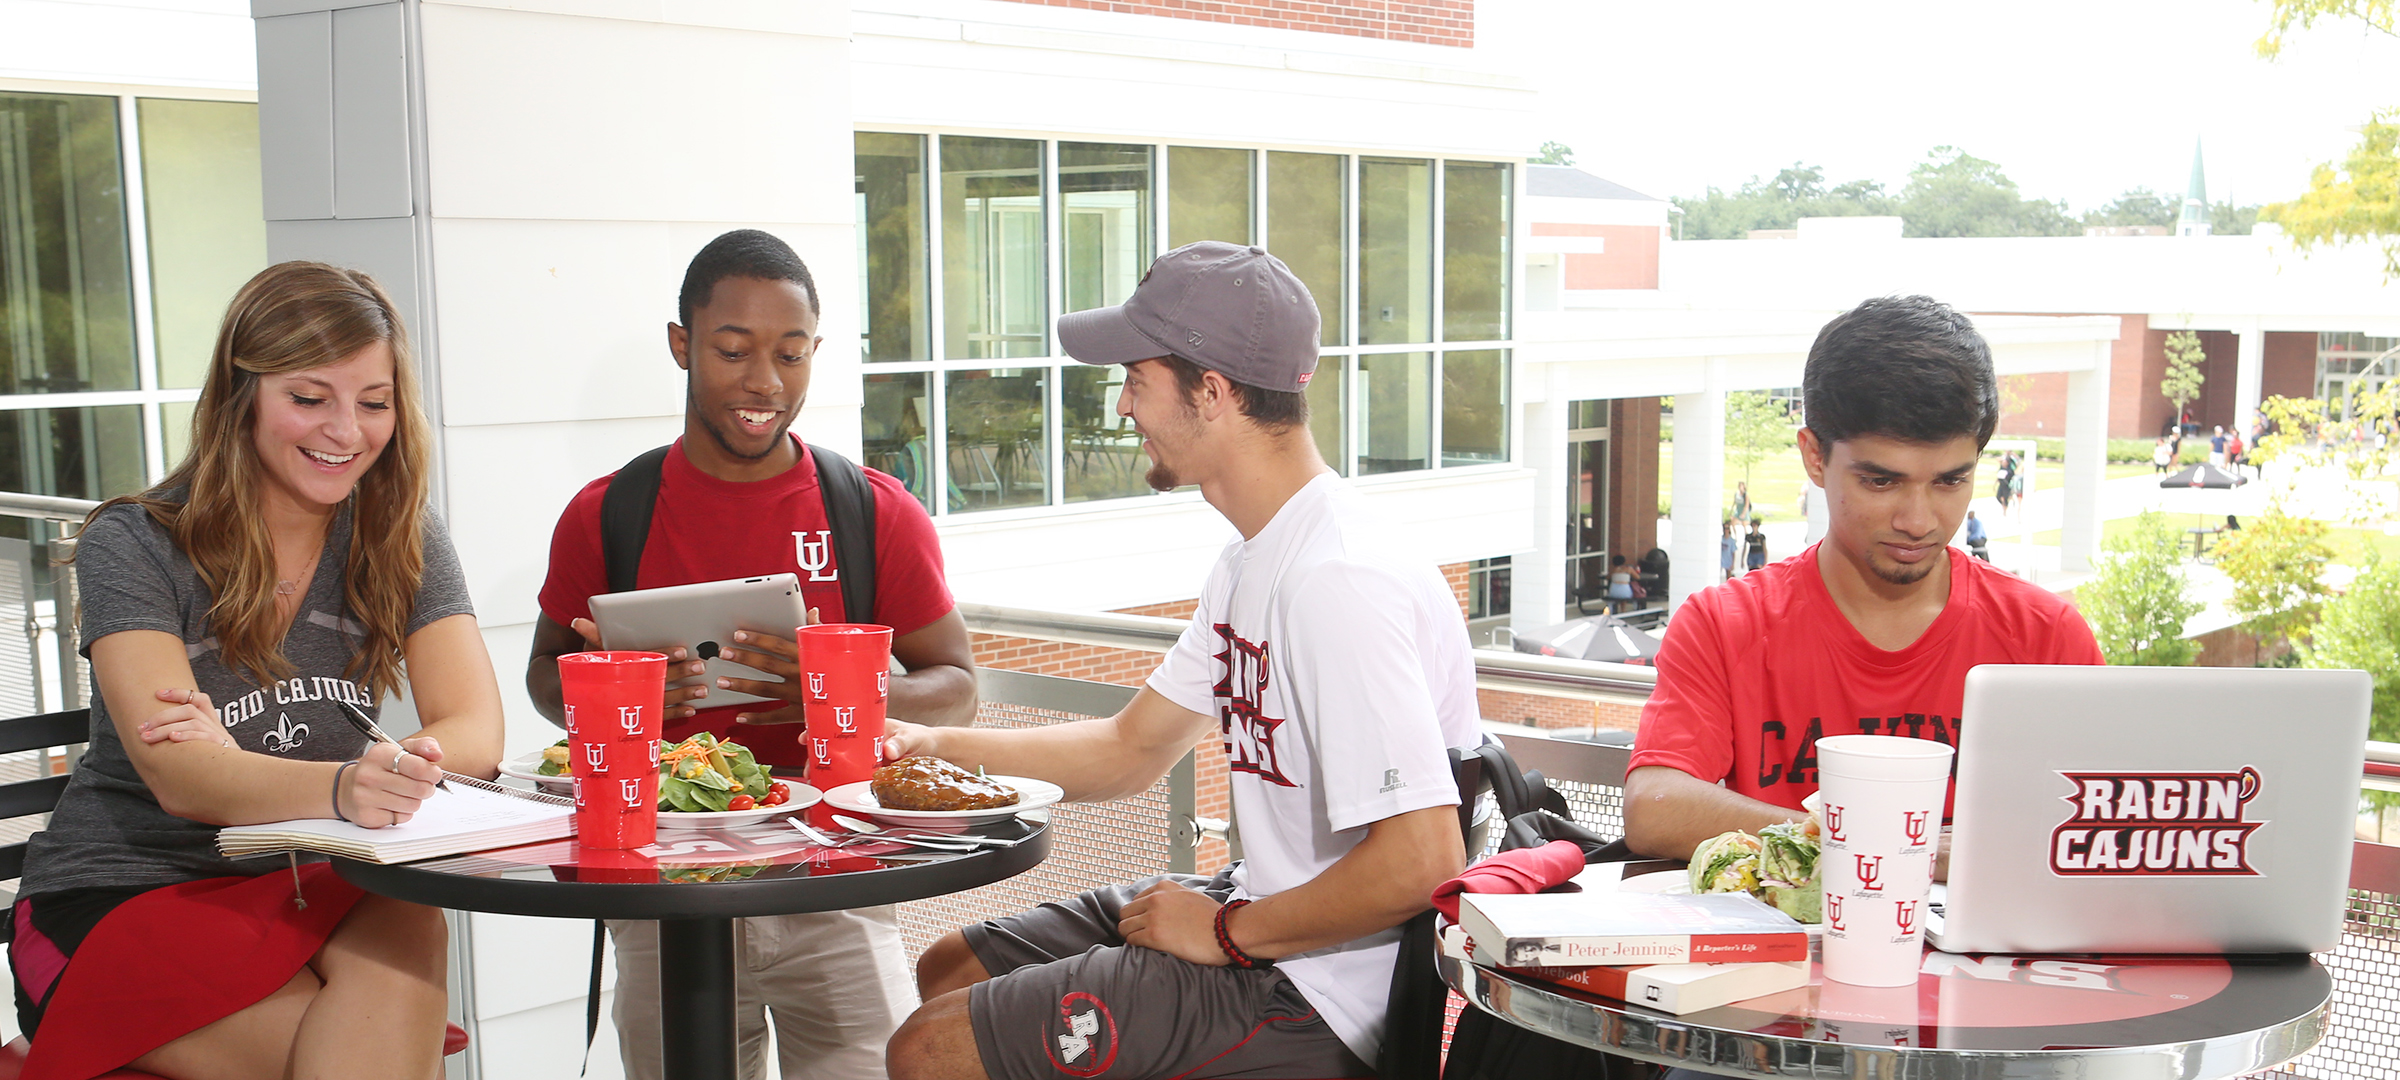 UL 69ý students eating lunch outsite of Cypress Dining Hall